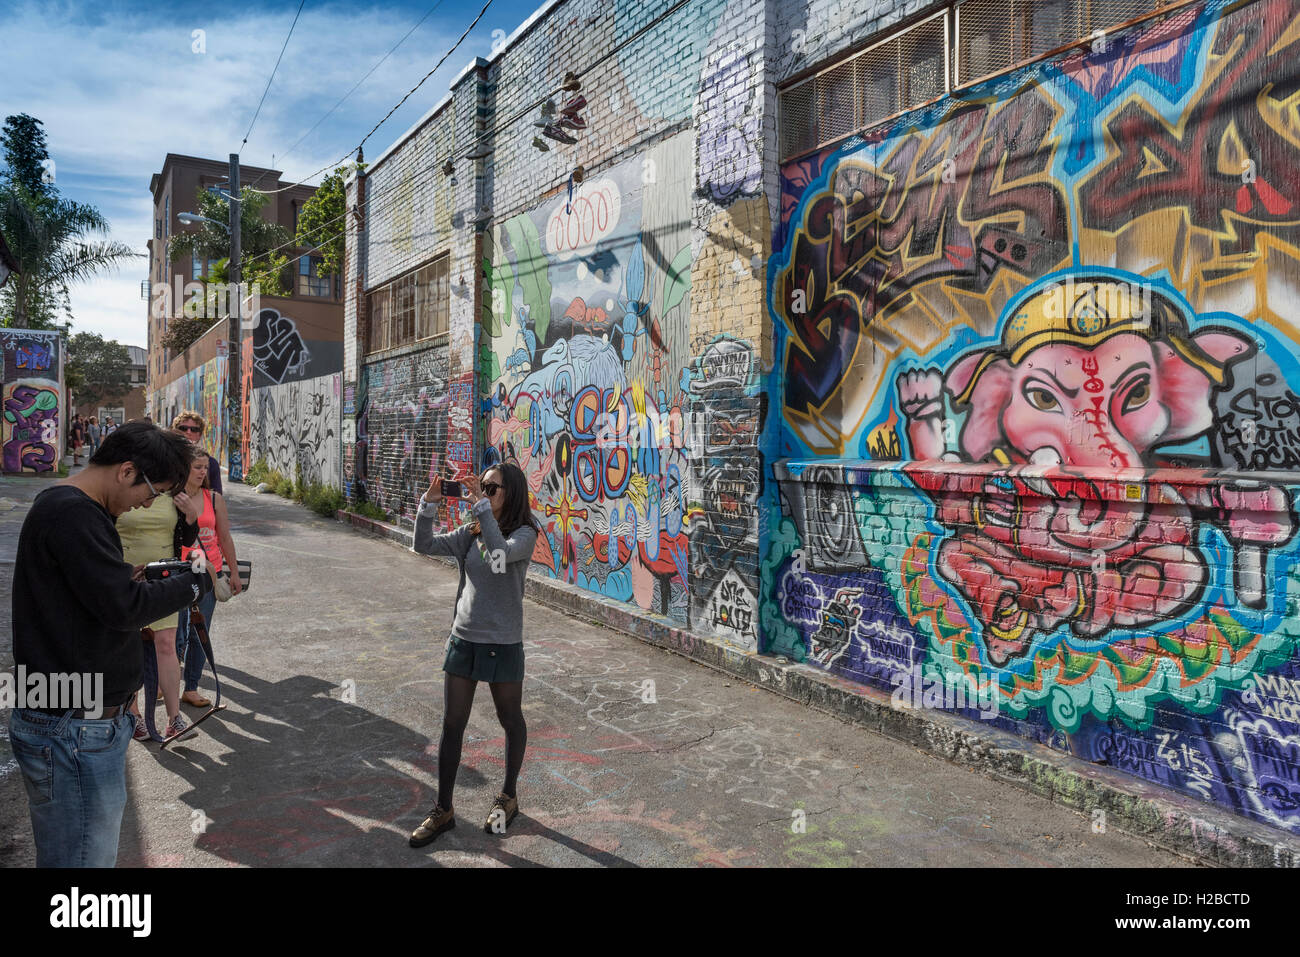 Murals And Graffiti Art On Walls In Clarion Alley In The Mission Stock Photo Alamy